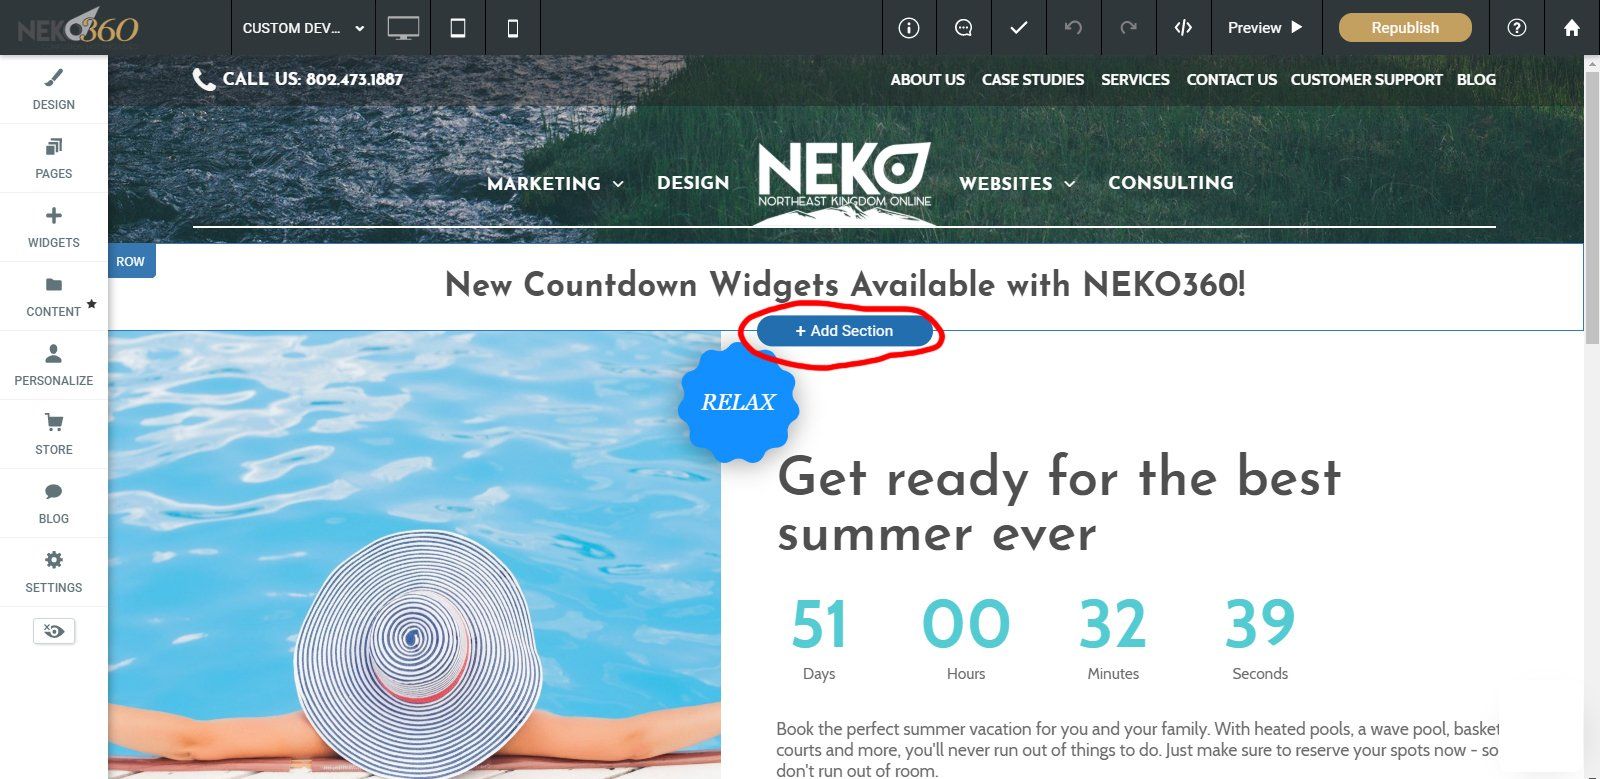 How to easily add a pre-designed section to your NEKO360 website?